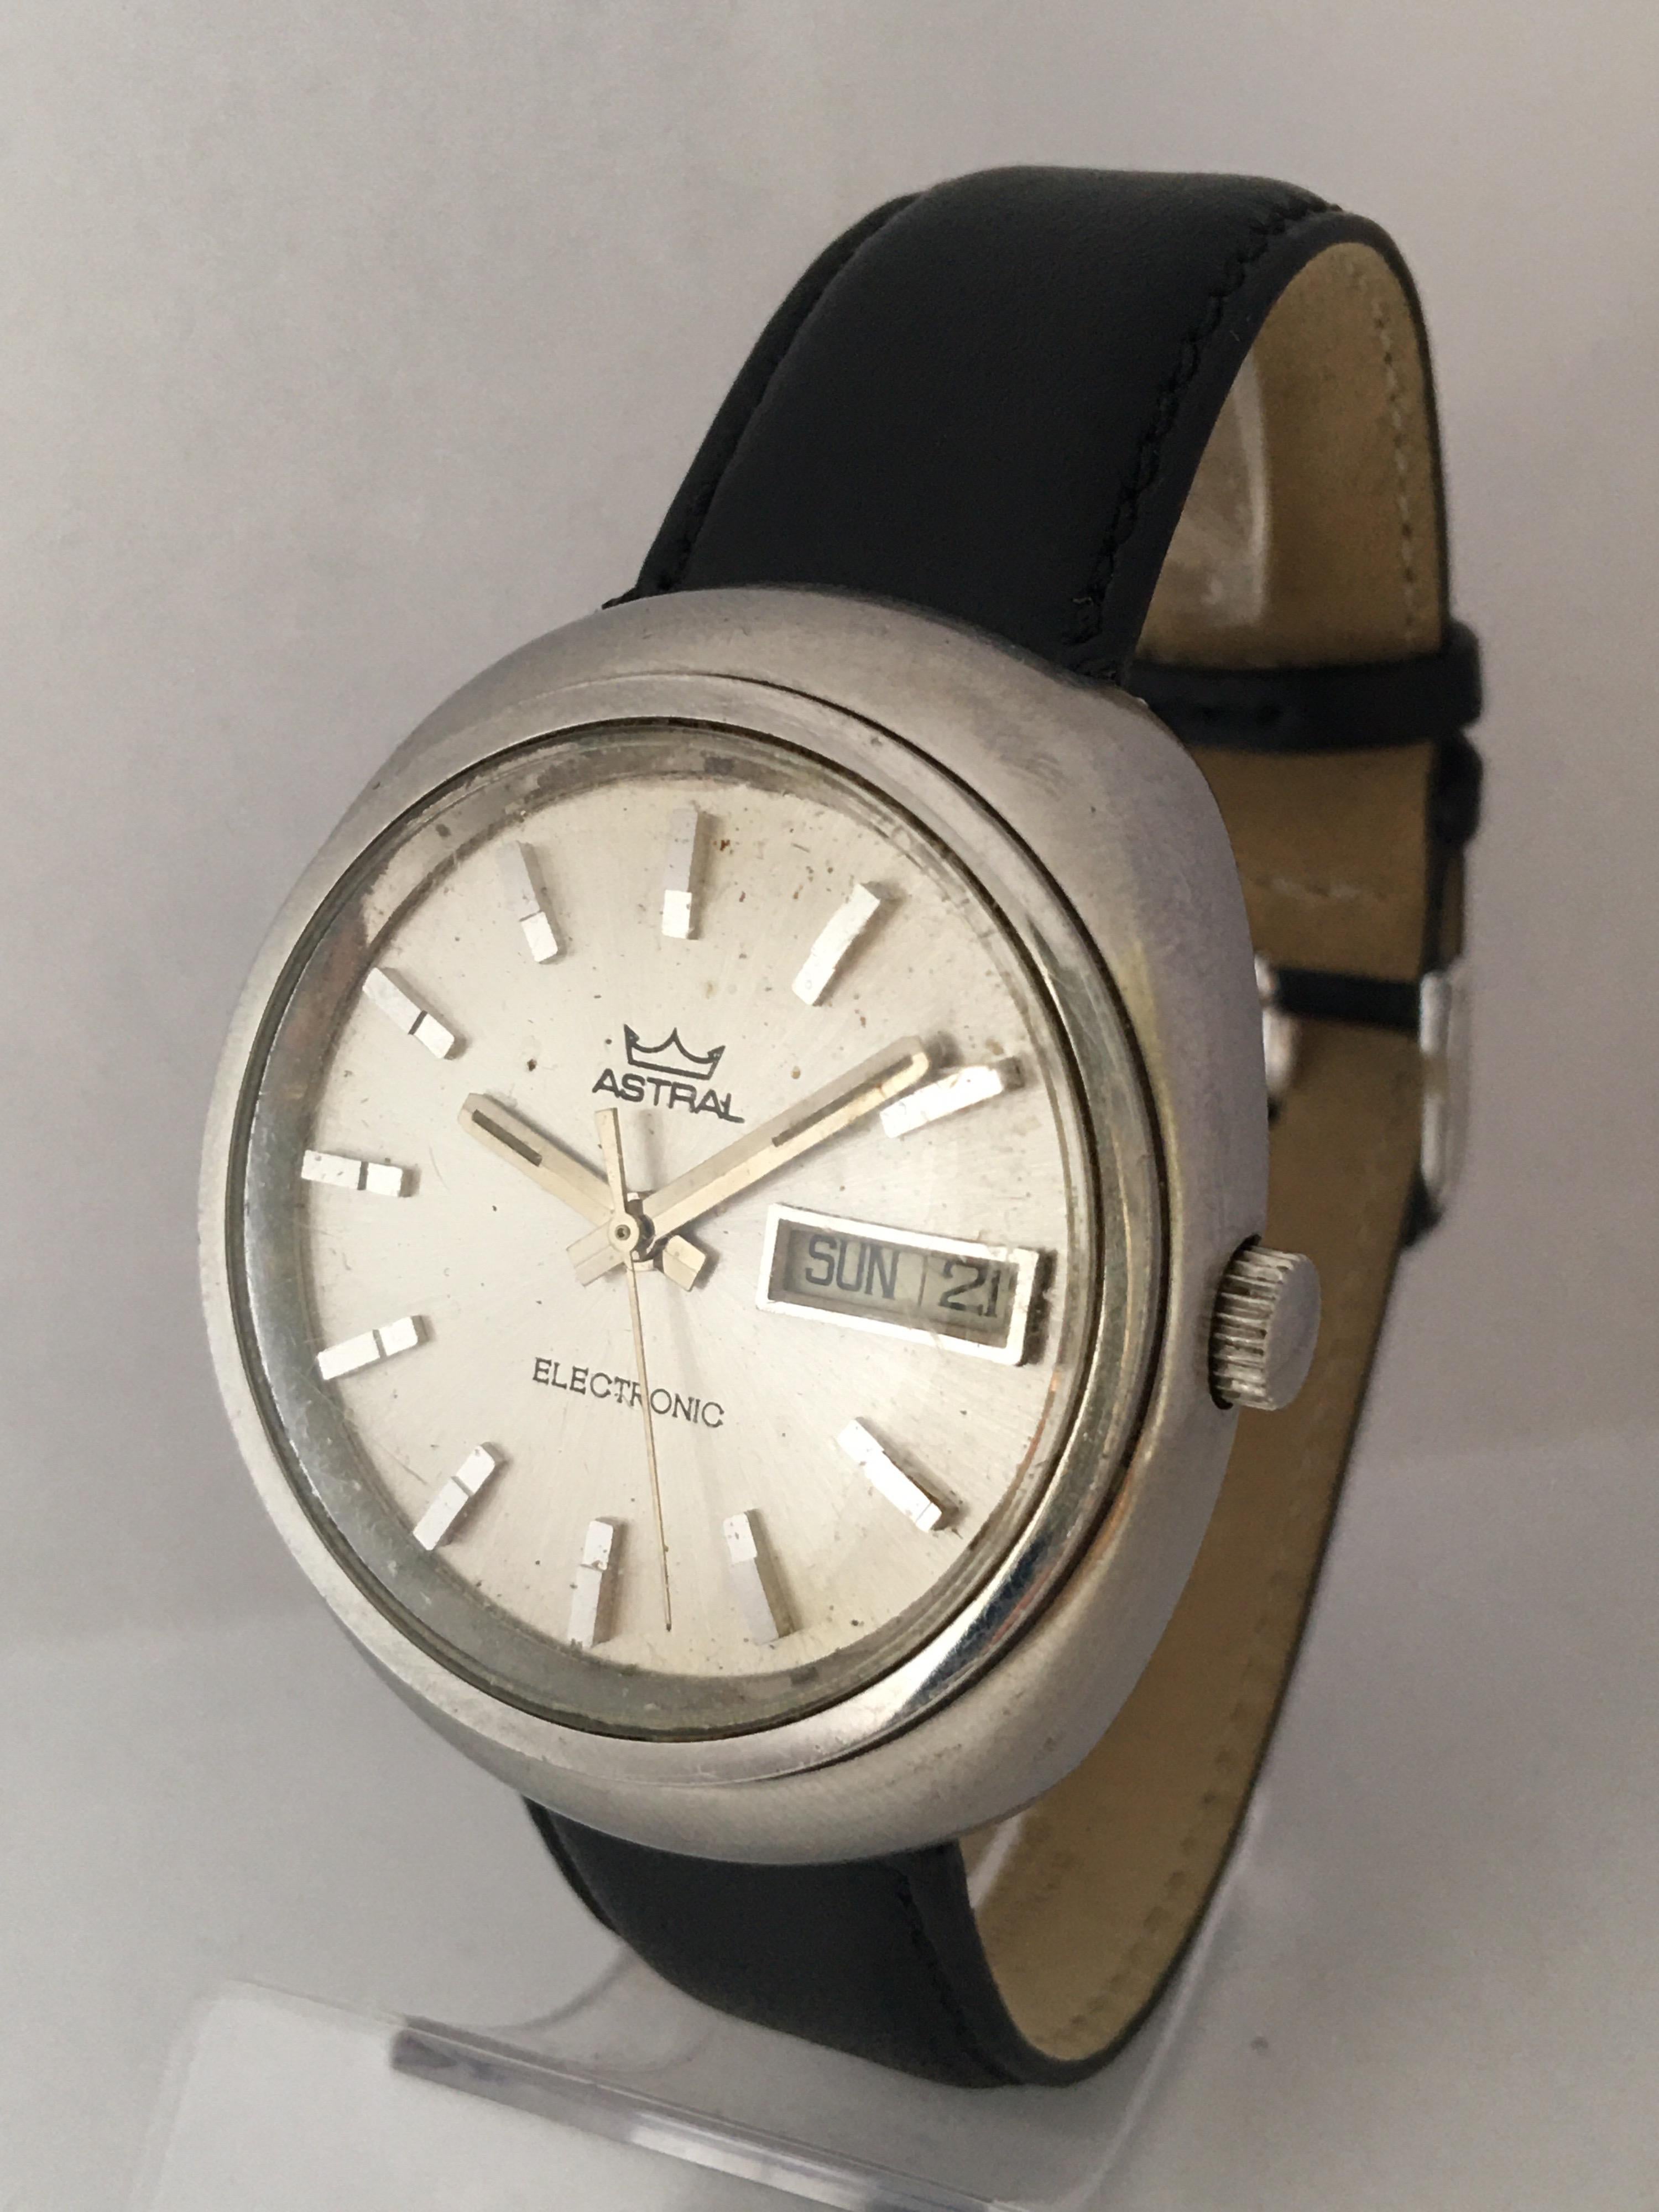 This Classic Charming Dynotron Electronic movement Watch is in good working condition and it is running well. Visible signs of ageing and wear with small scratches on the watch case and some dirt/dust in the dial as shown. it is fitted with a new